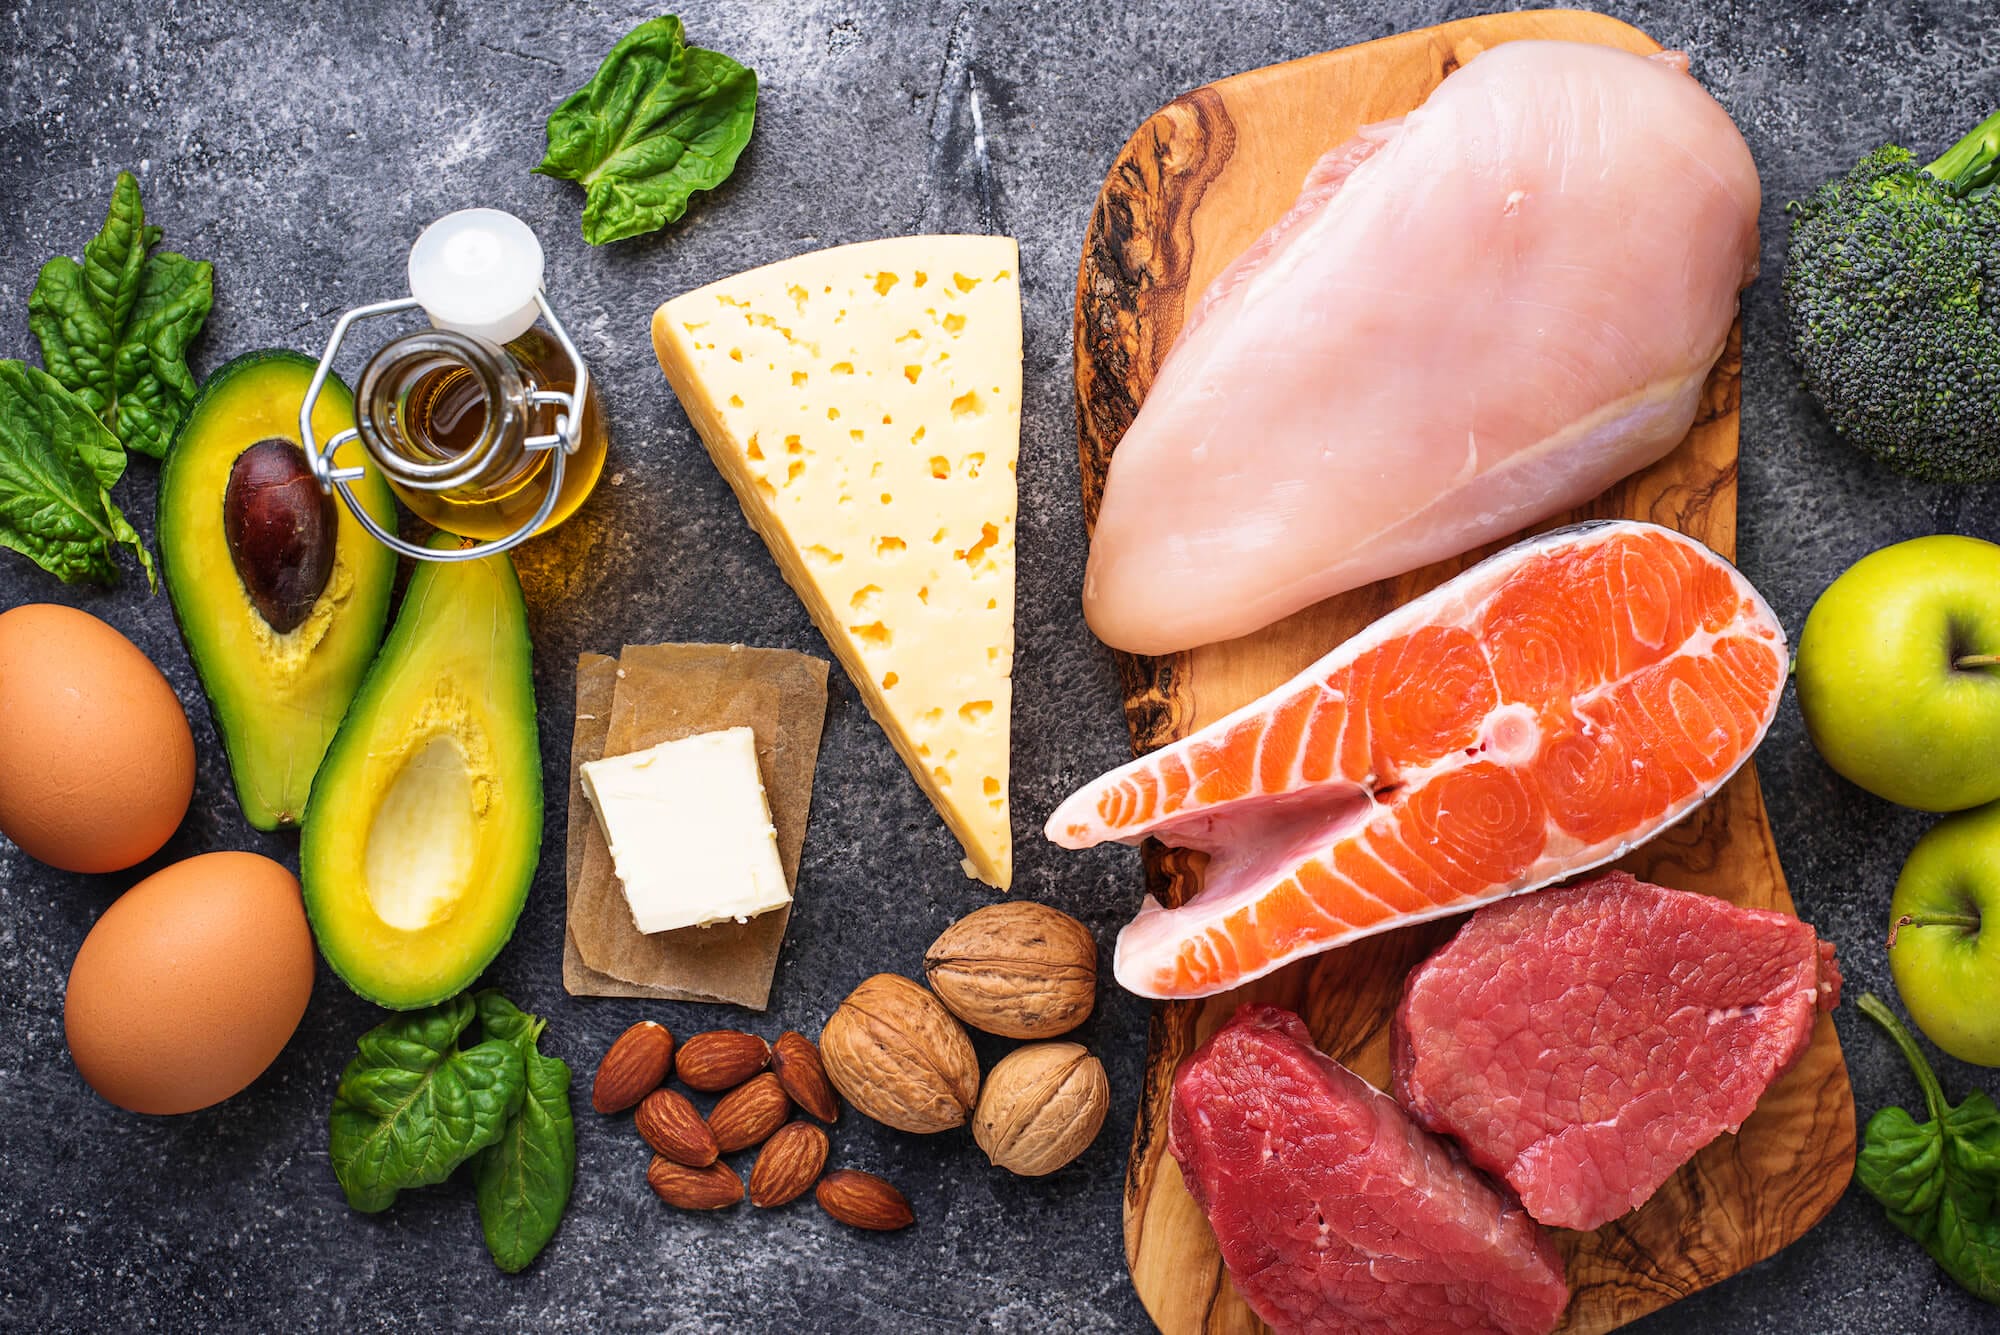 The ketogenic diet consists of foods that are high in fat and low in carbohydrates.